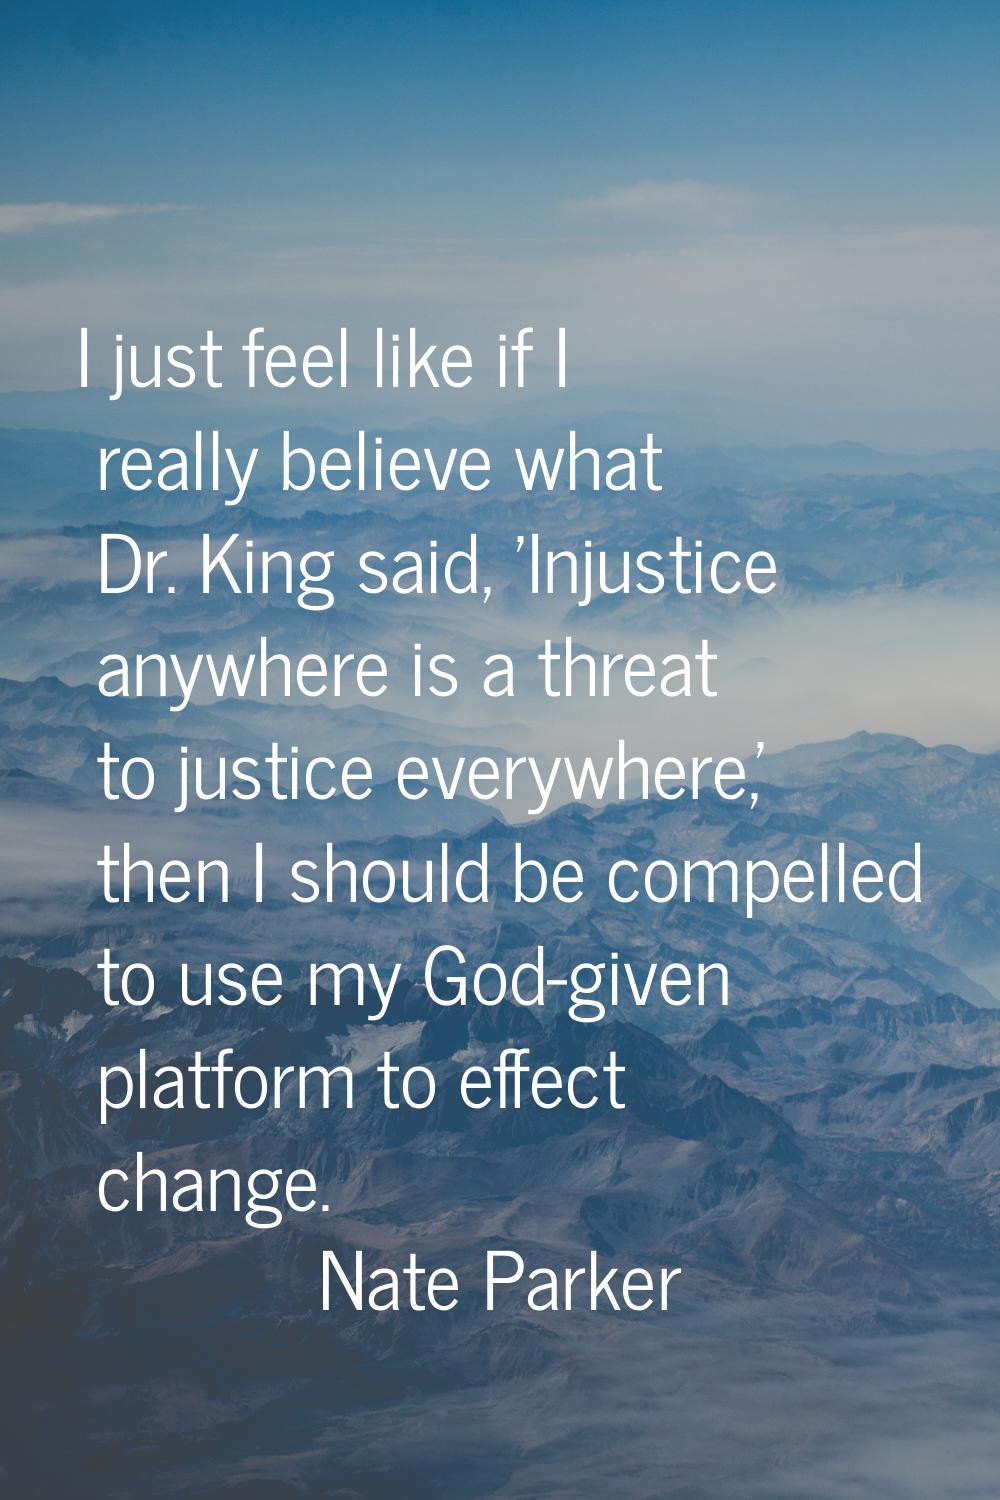 I just feel like if I really believe what Dr. King said, 'Injustice anywhere is a threat to justice